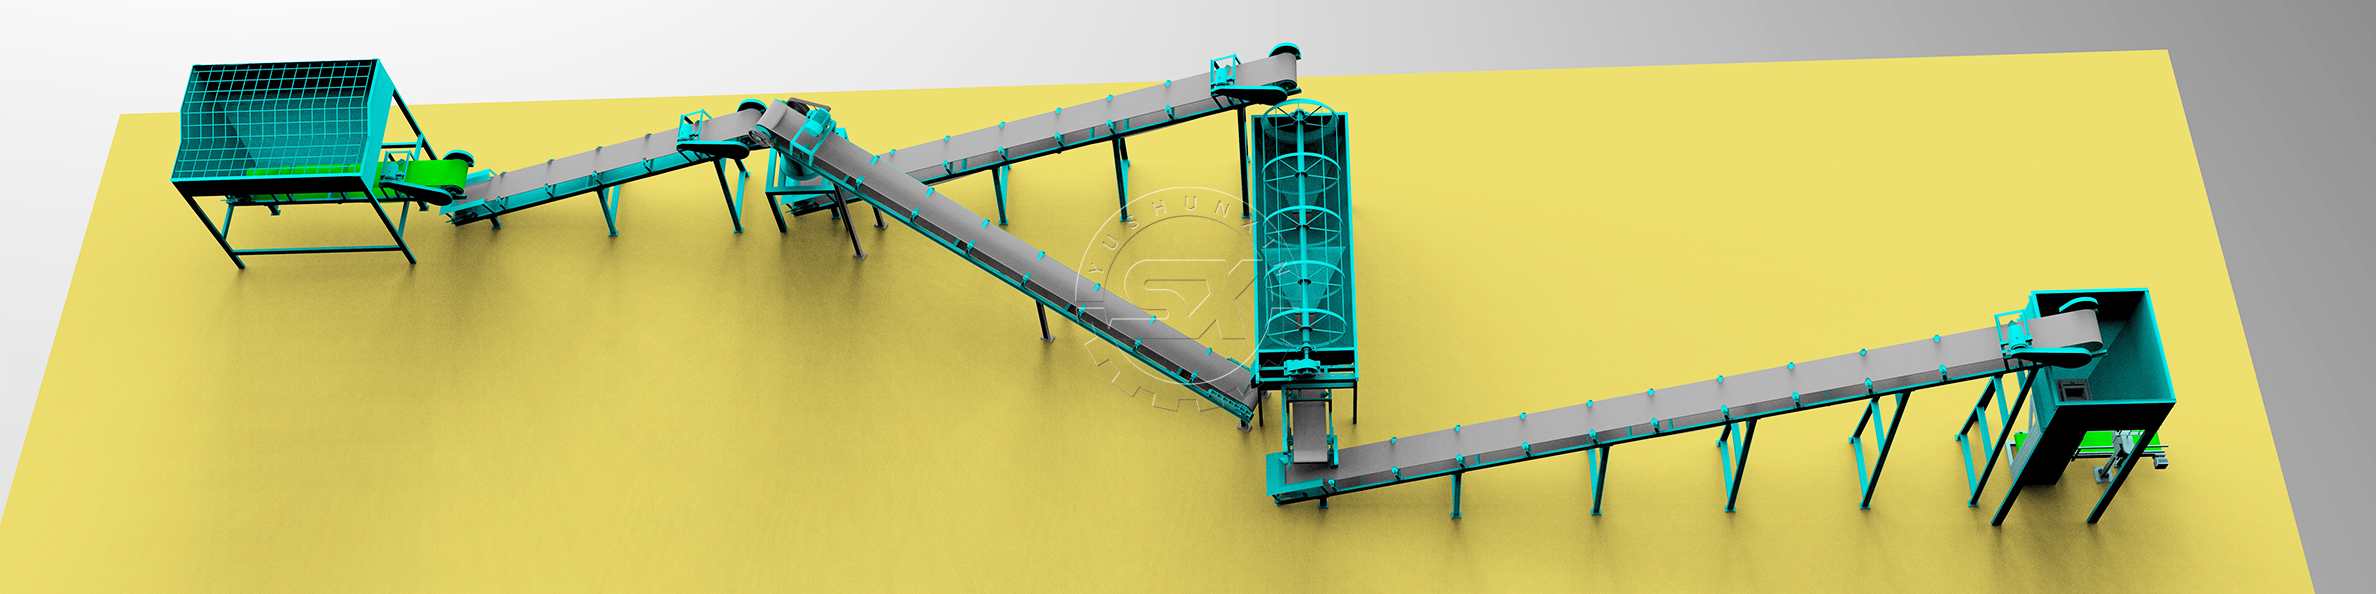 Medium Powder Fertilizer Production Line with an Hourly Output of 1 Ton